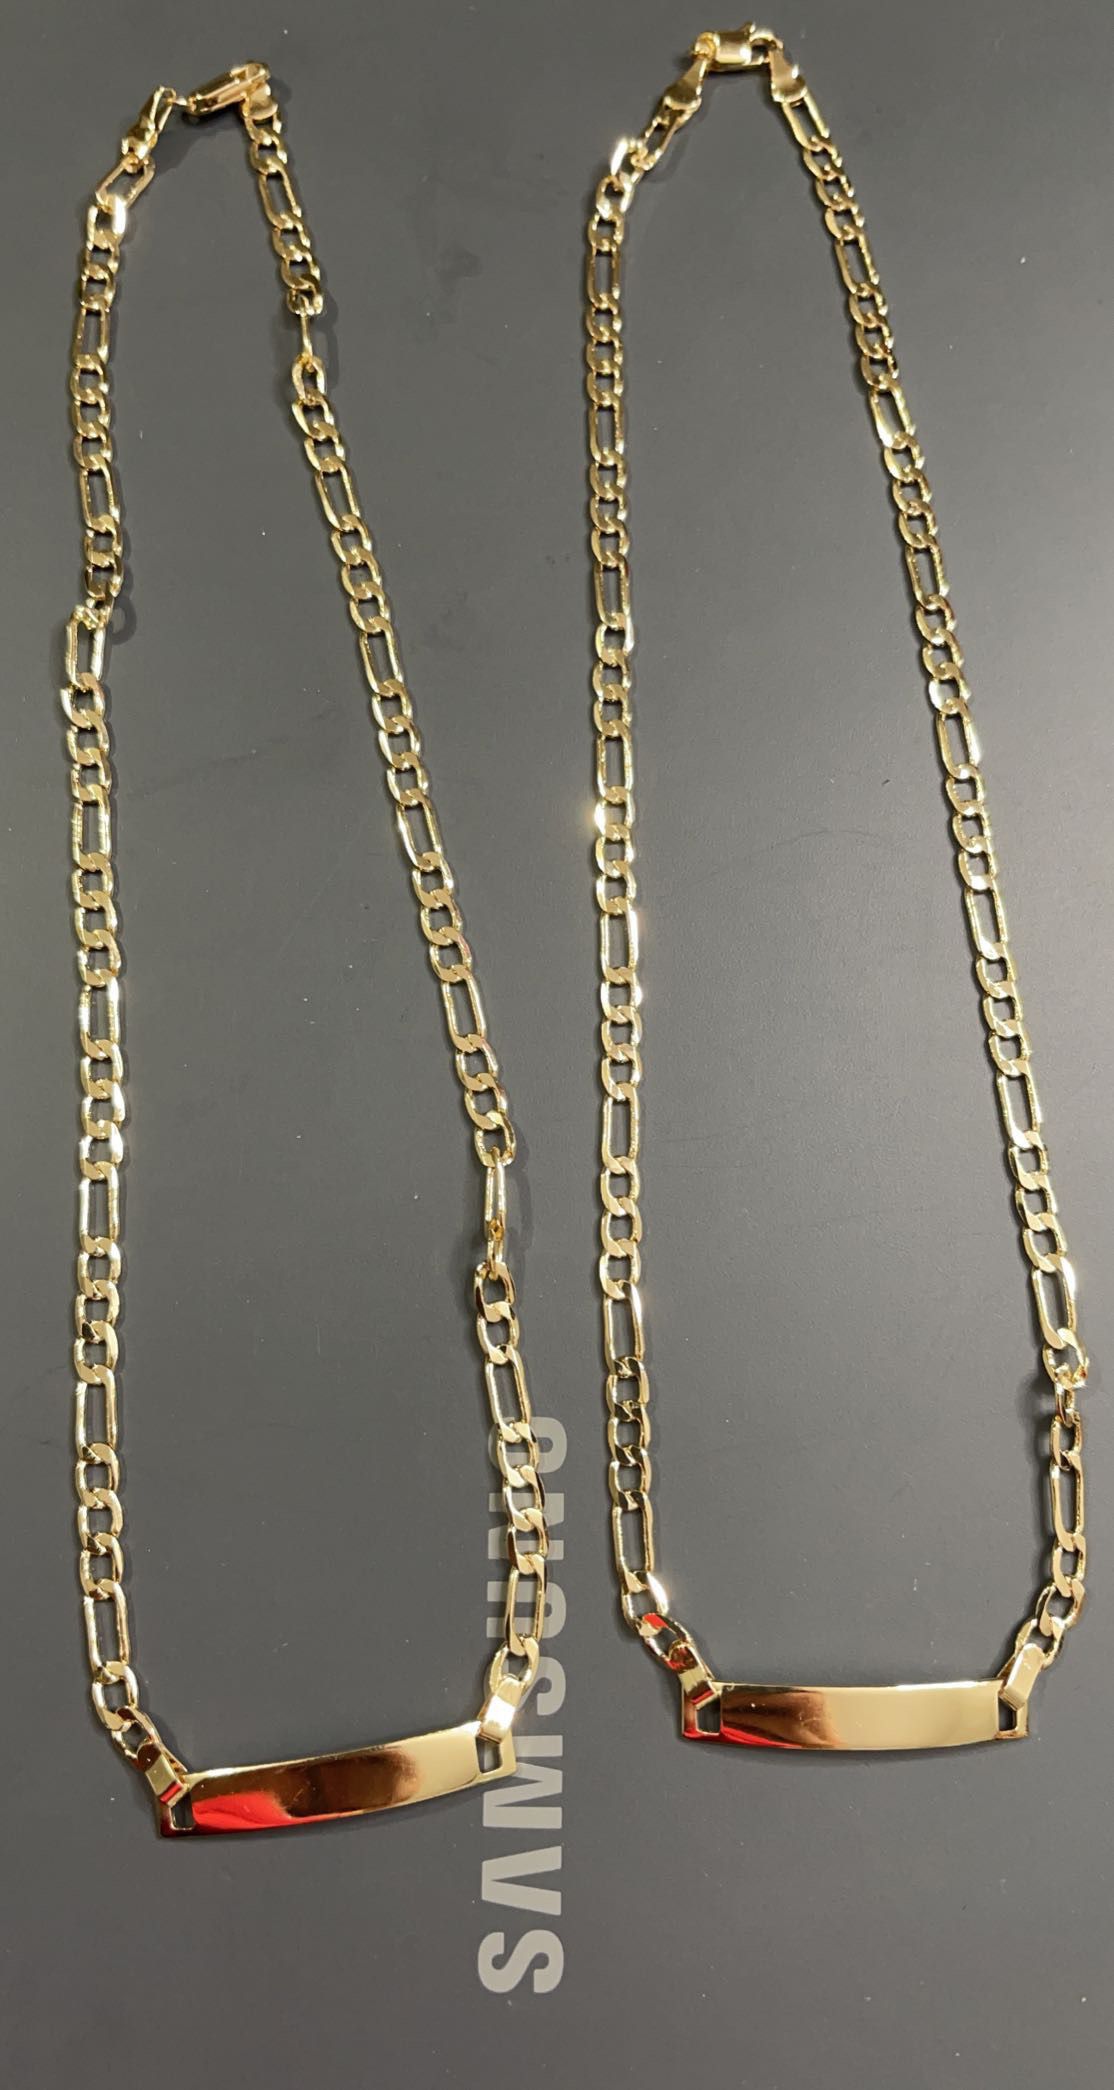 beautiful 14kt gold laminated chains